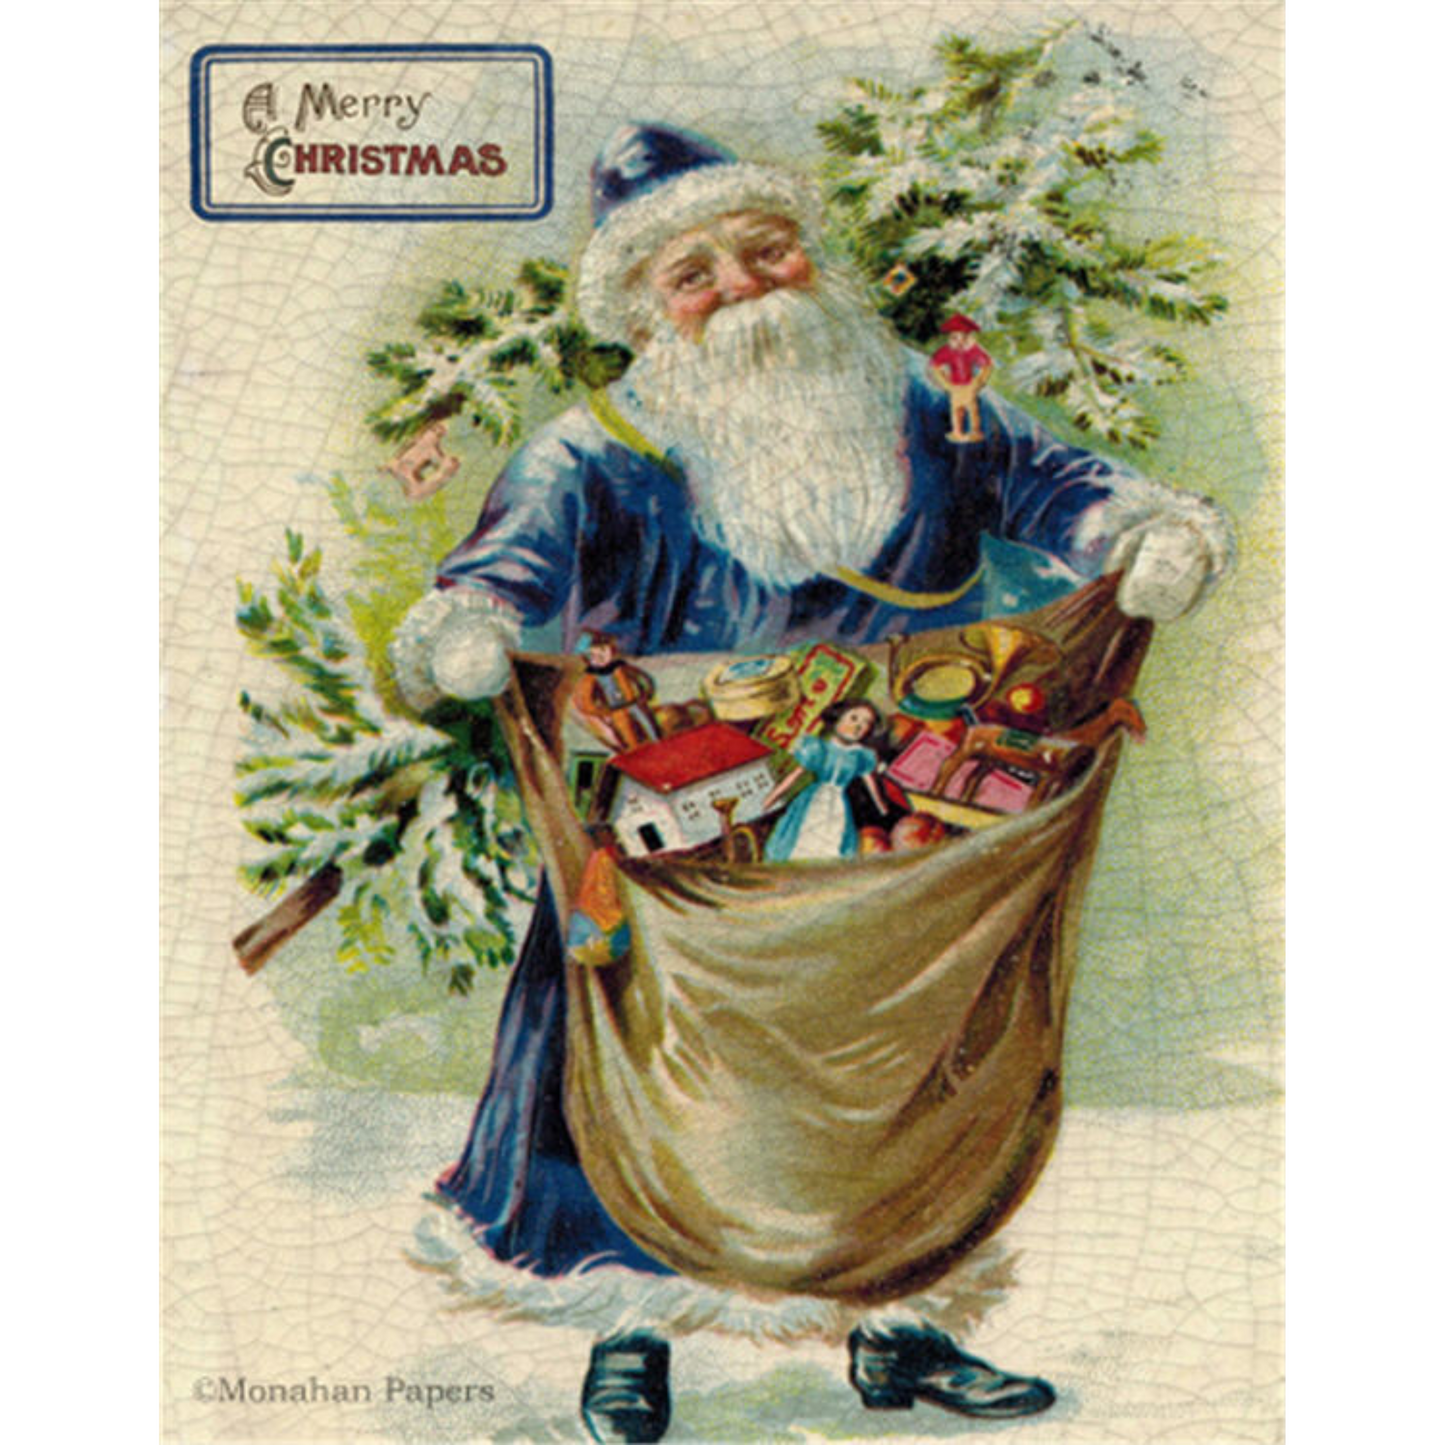 "A Merry Christmas Santa with Toy Bag" decoupage paper by Monahan Papers available at Milton's Daughter.